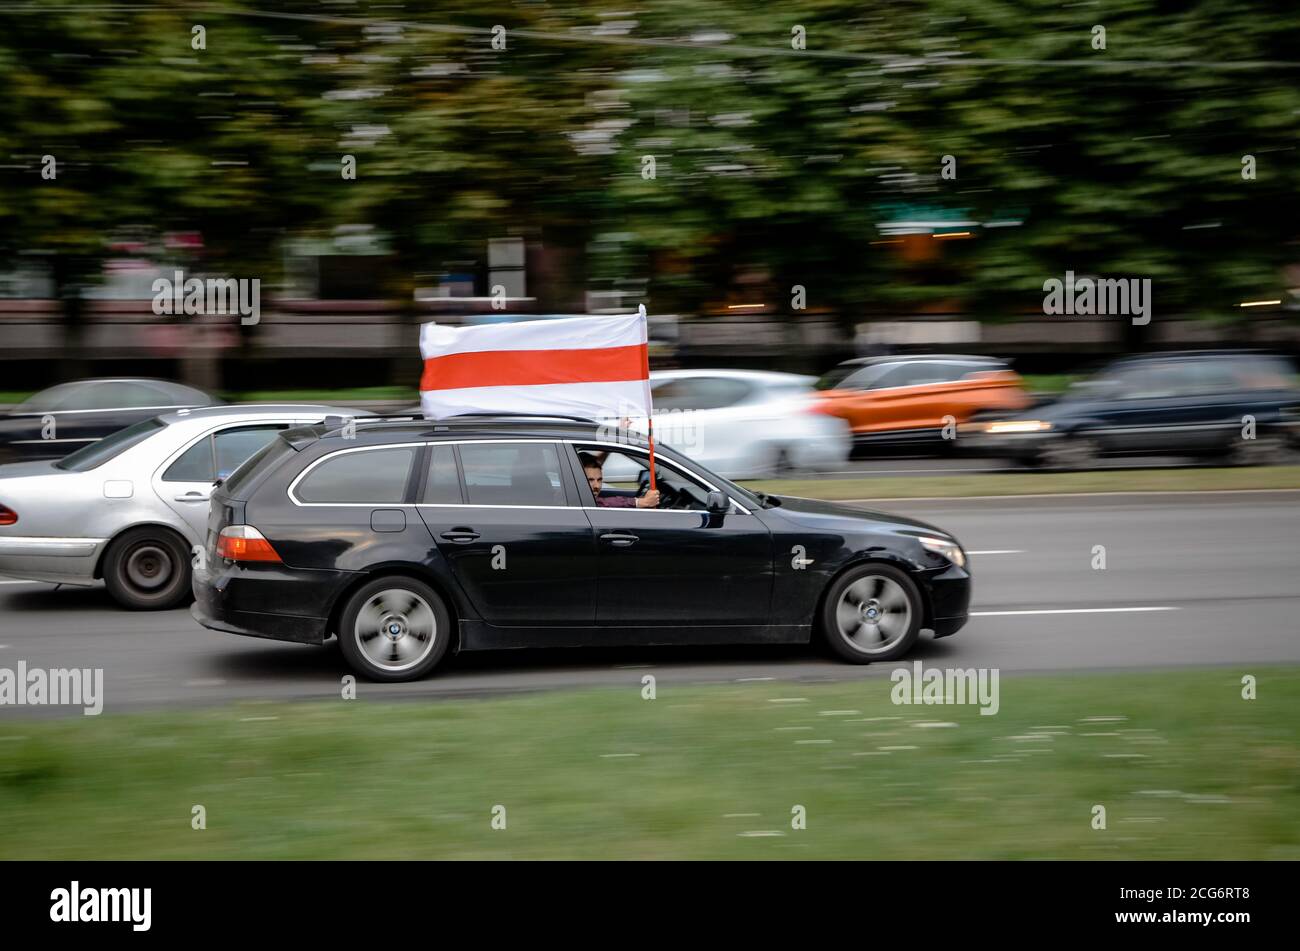 Minsk, Belarus - August 21, 2020: Belarusian people participate in peaceful protest after presidential elections in Belarus. Car passenger holds a whi Stock Photo